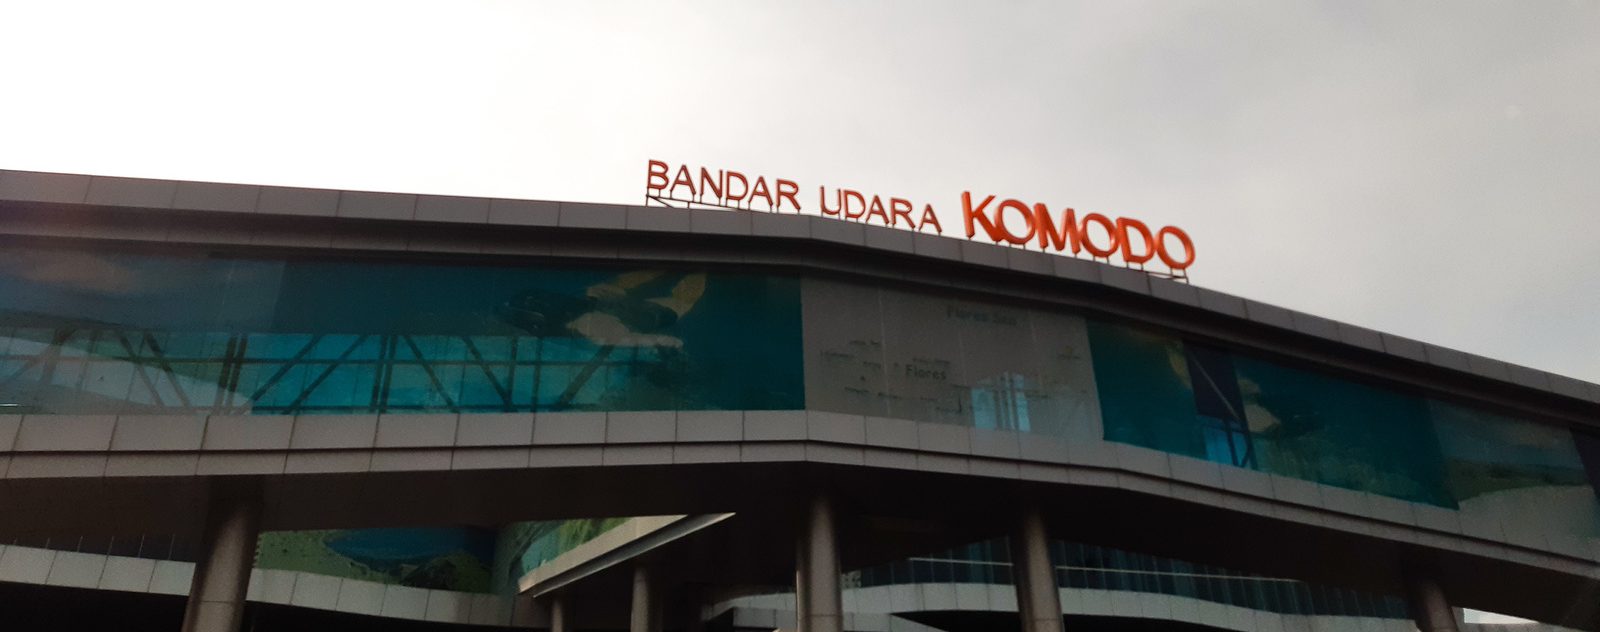 Komodo airport sign at the back of the airport